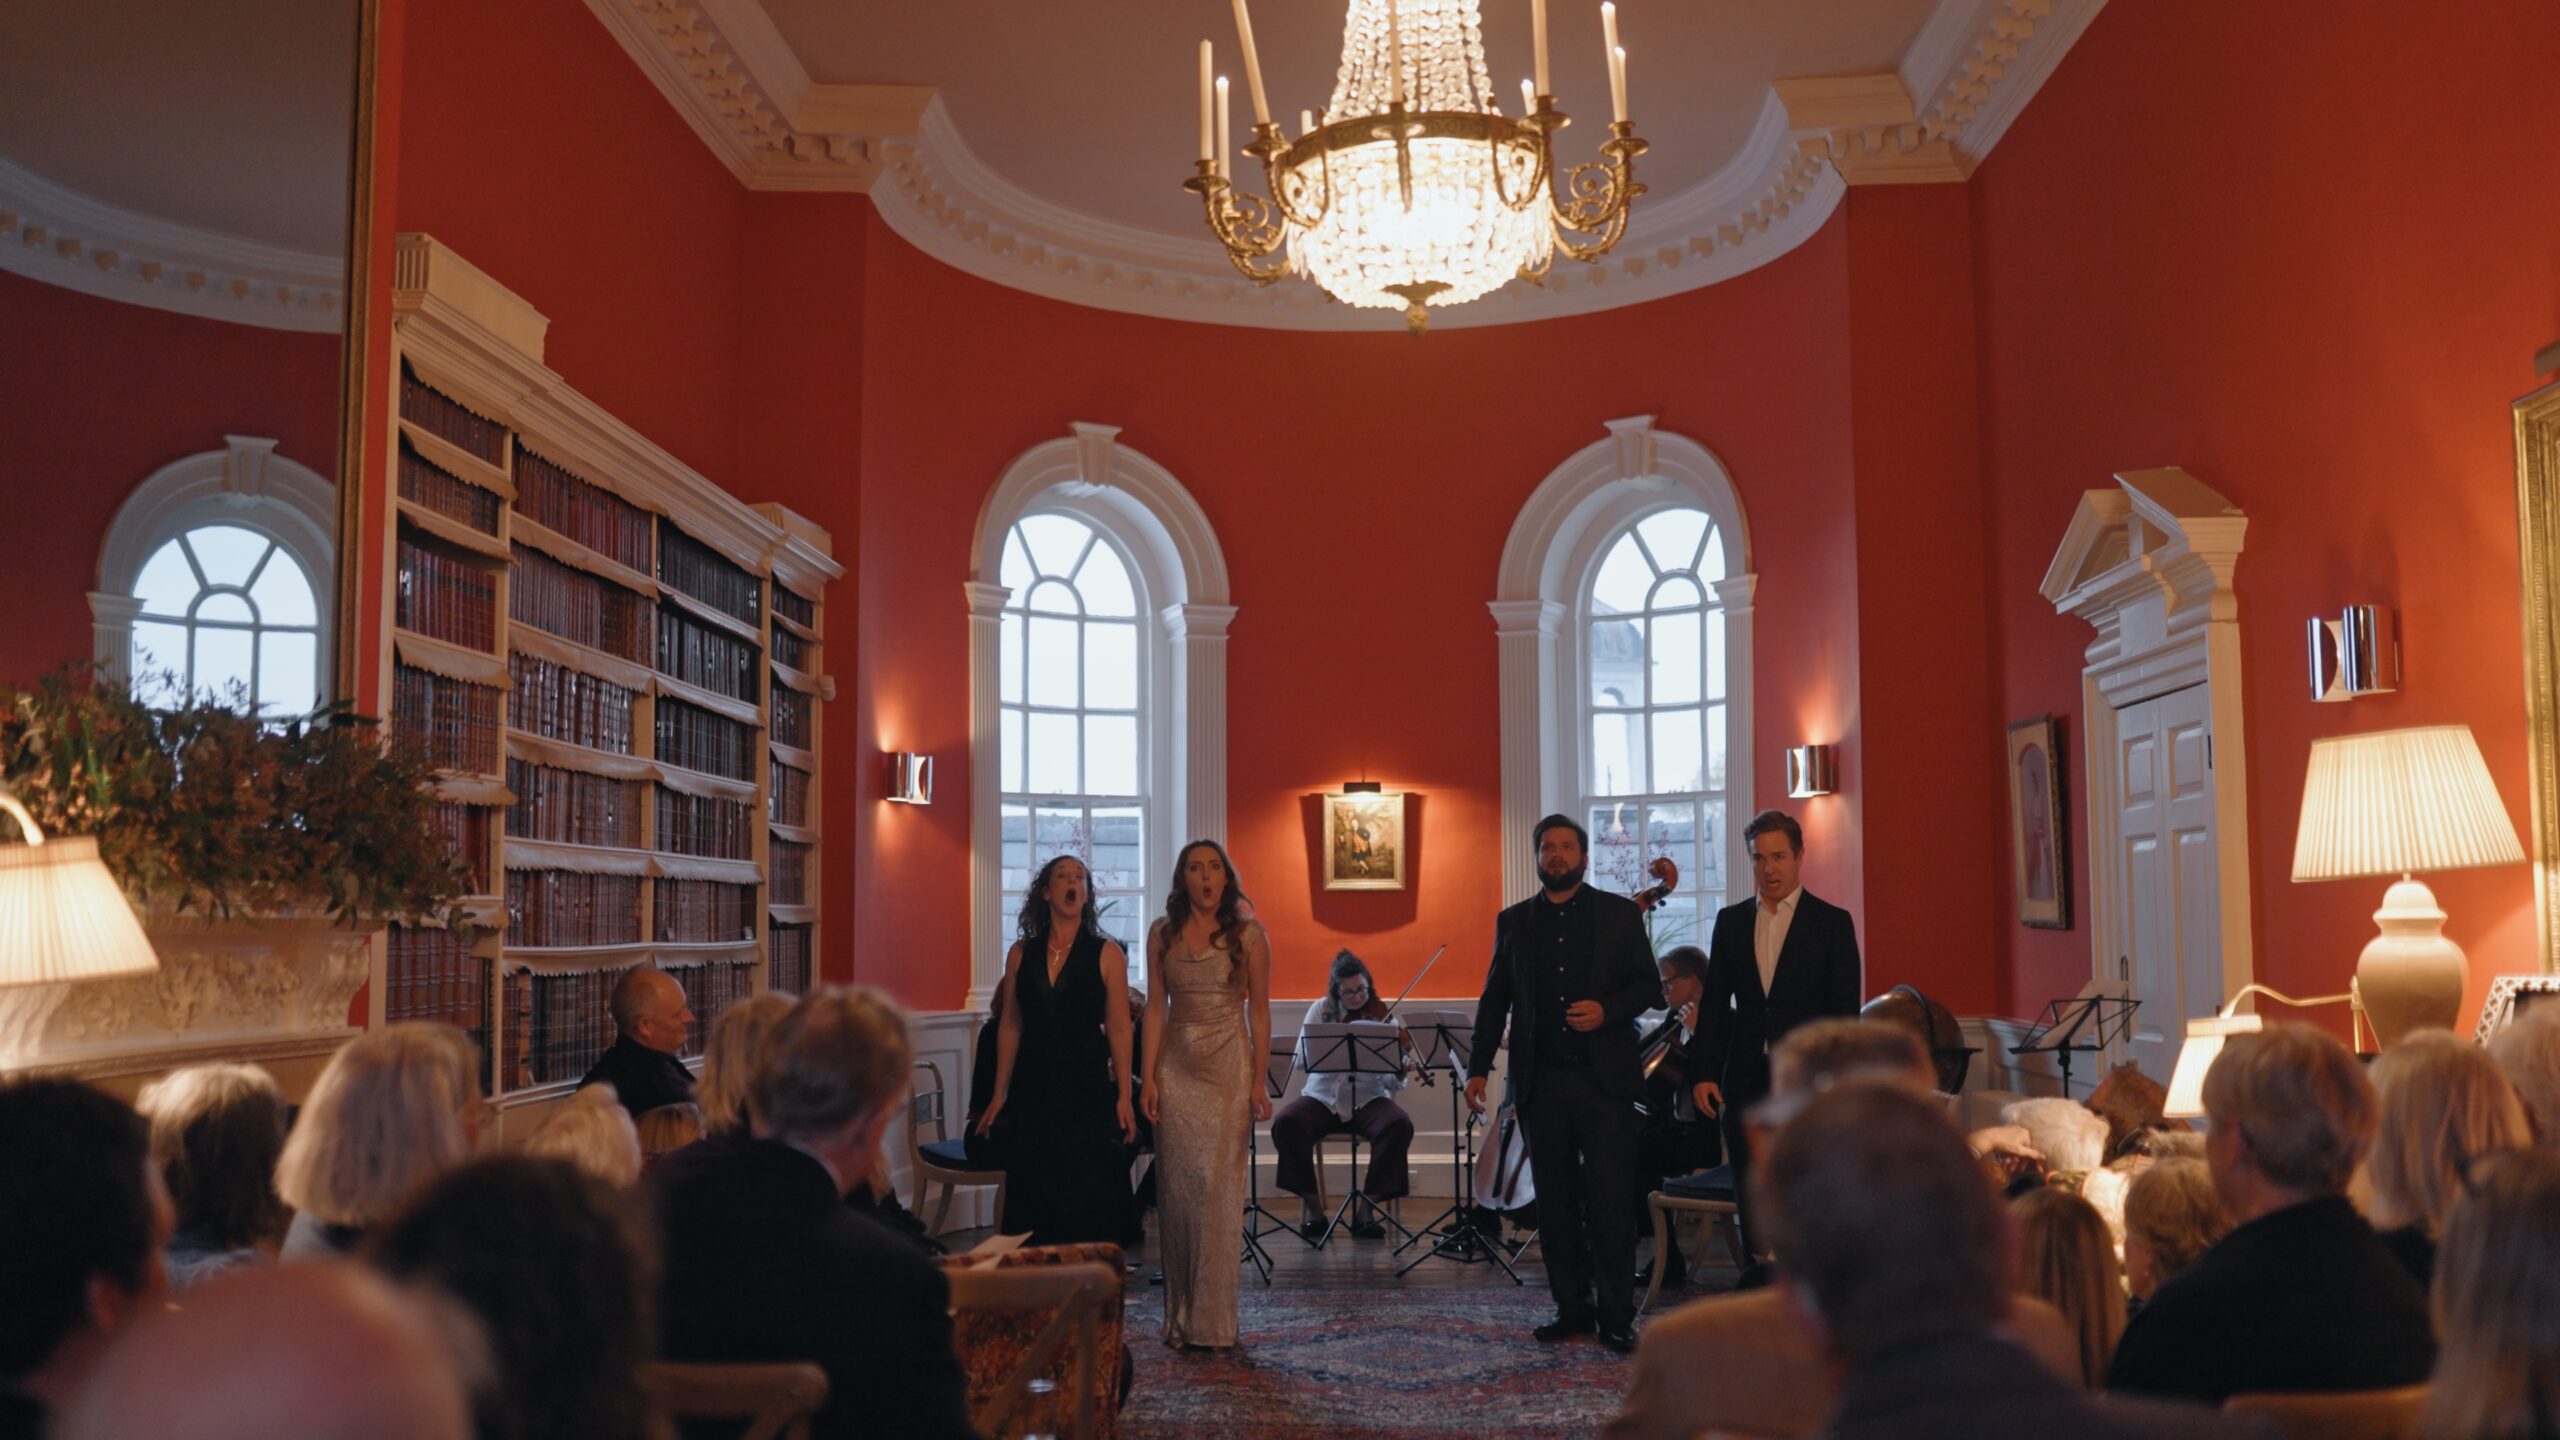 Two men wearing black suits and white shirt stands in a classical Library with two women wearing evening gowns with a quartet of string players playing behind them as they sing opera.